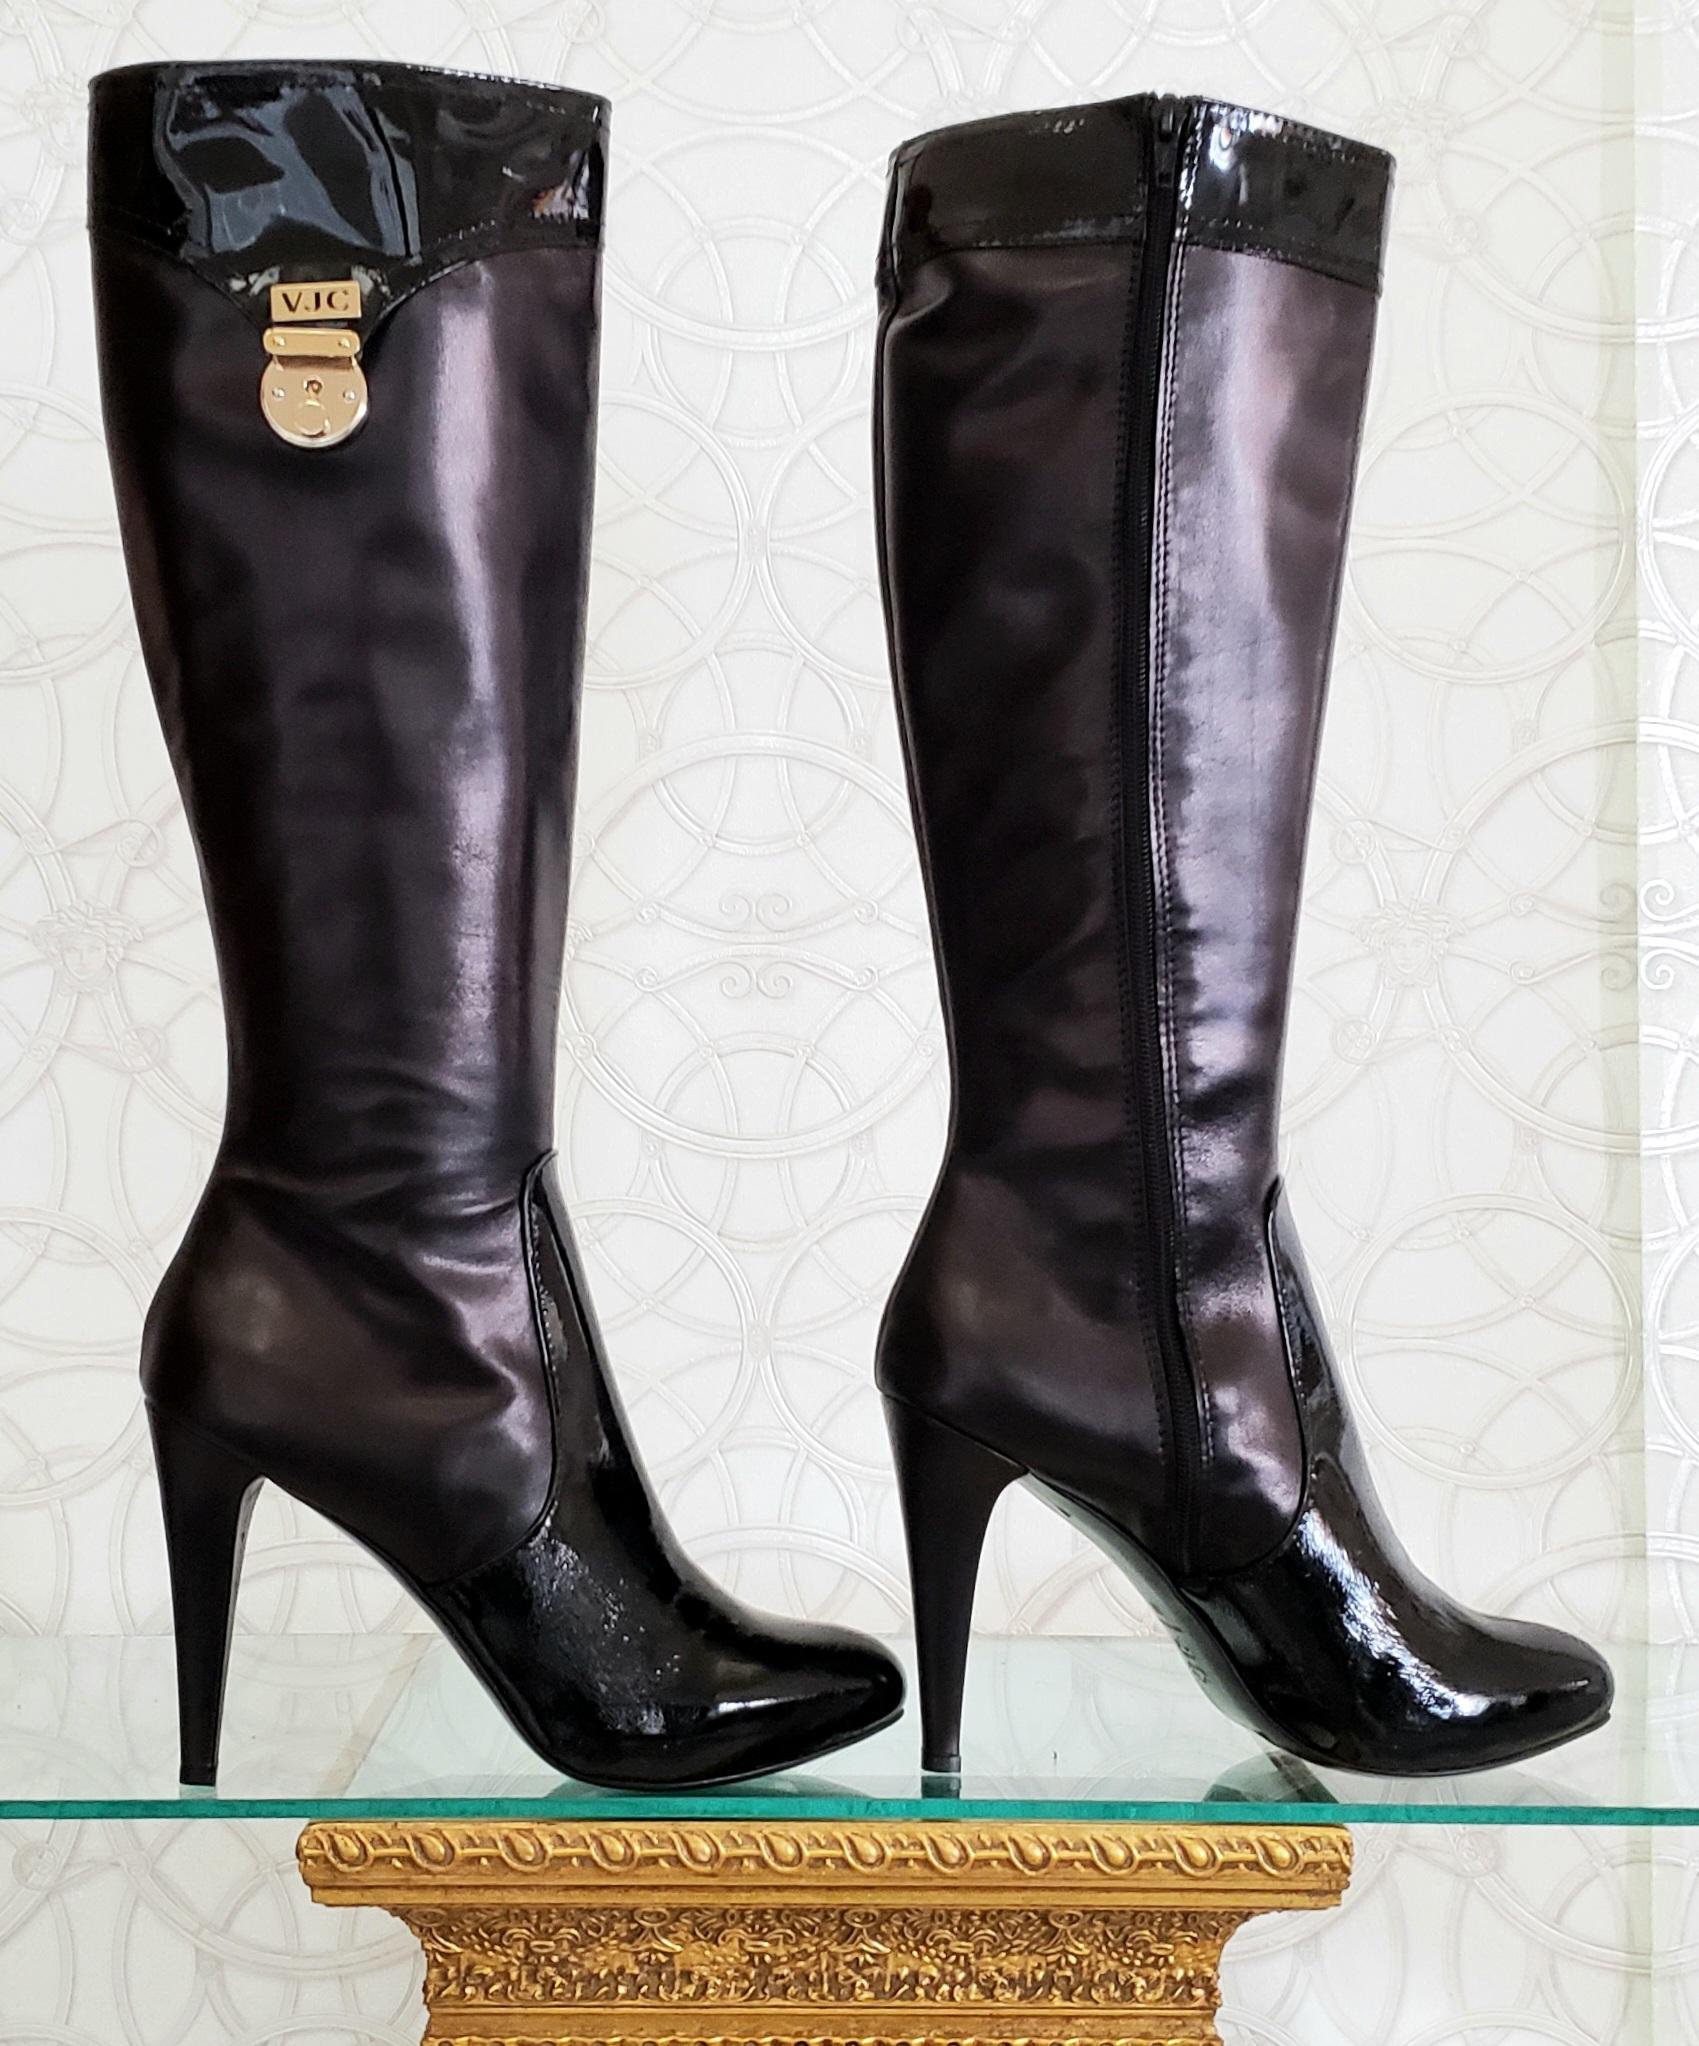 Black NEW VERSACE VJC BLACK LEATHER BOOTS with PATENT LEATHER INSERTS  39 - 9 For Sale